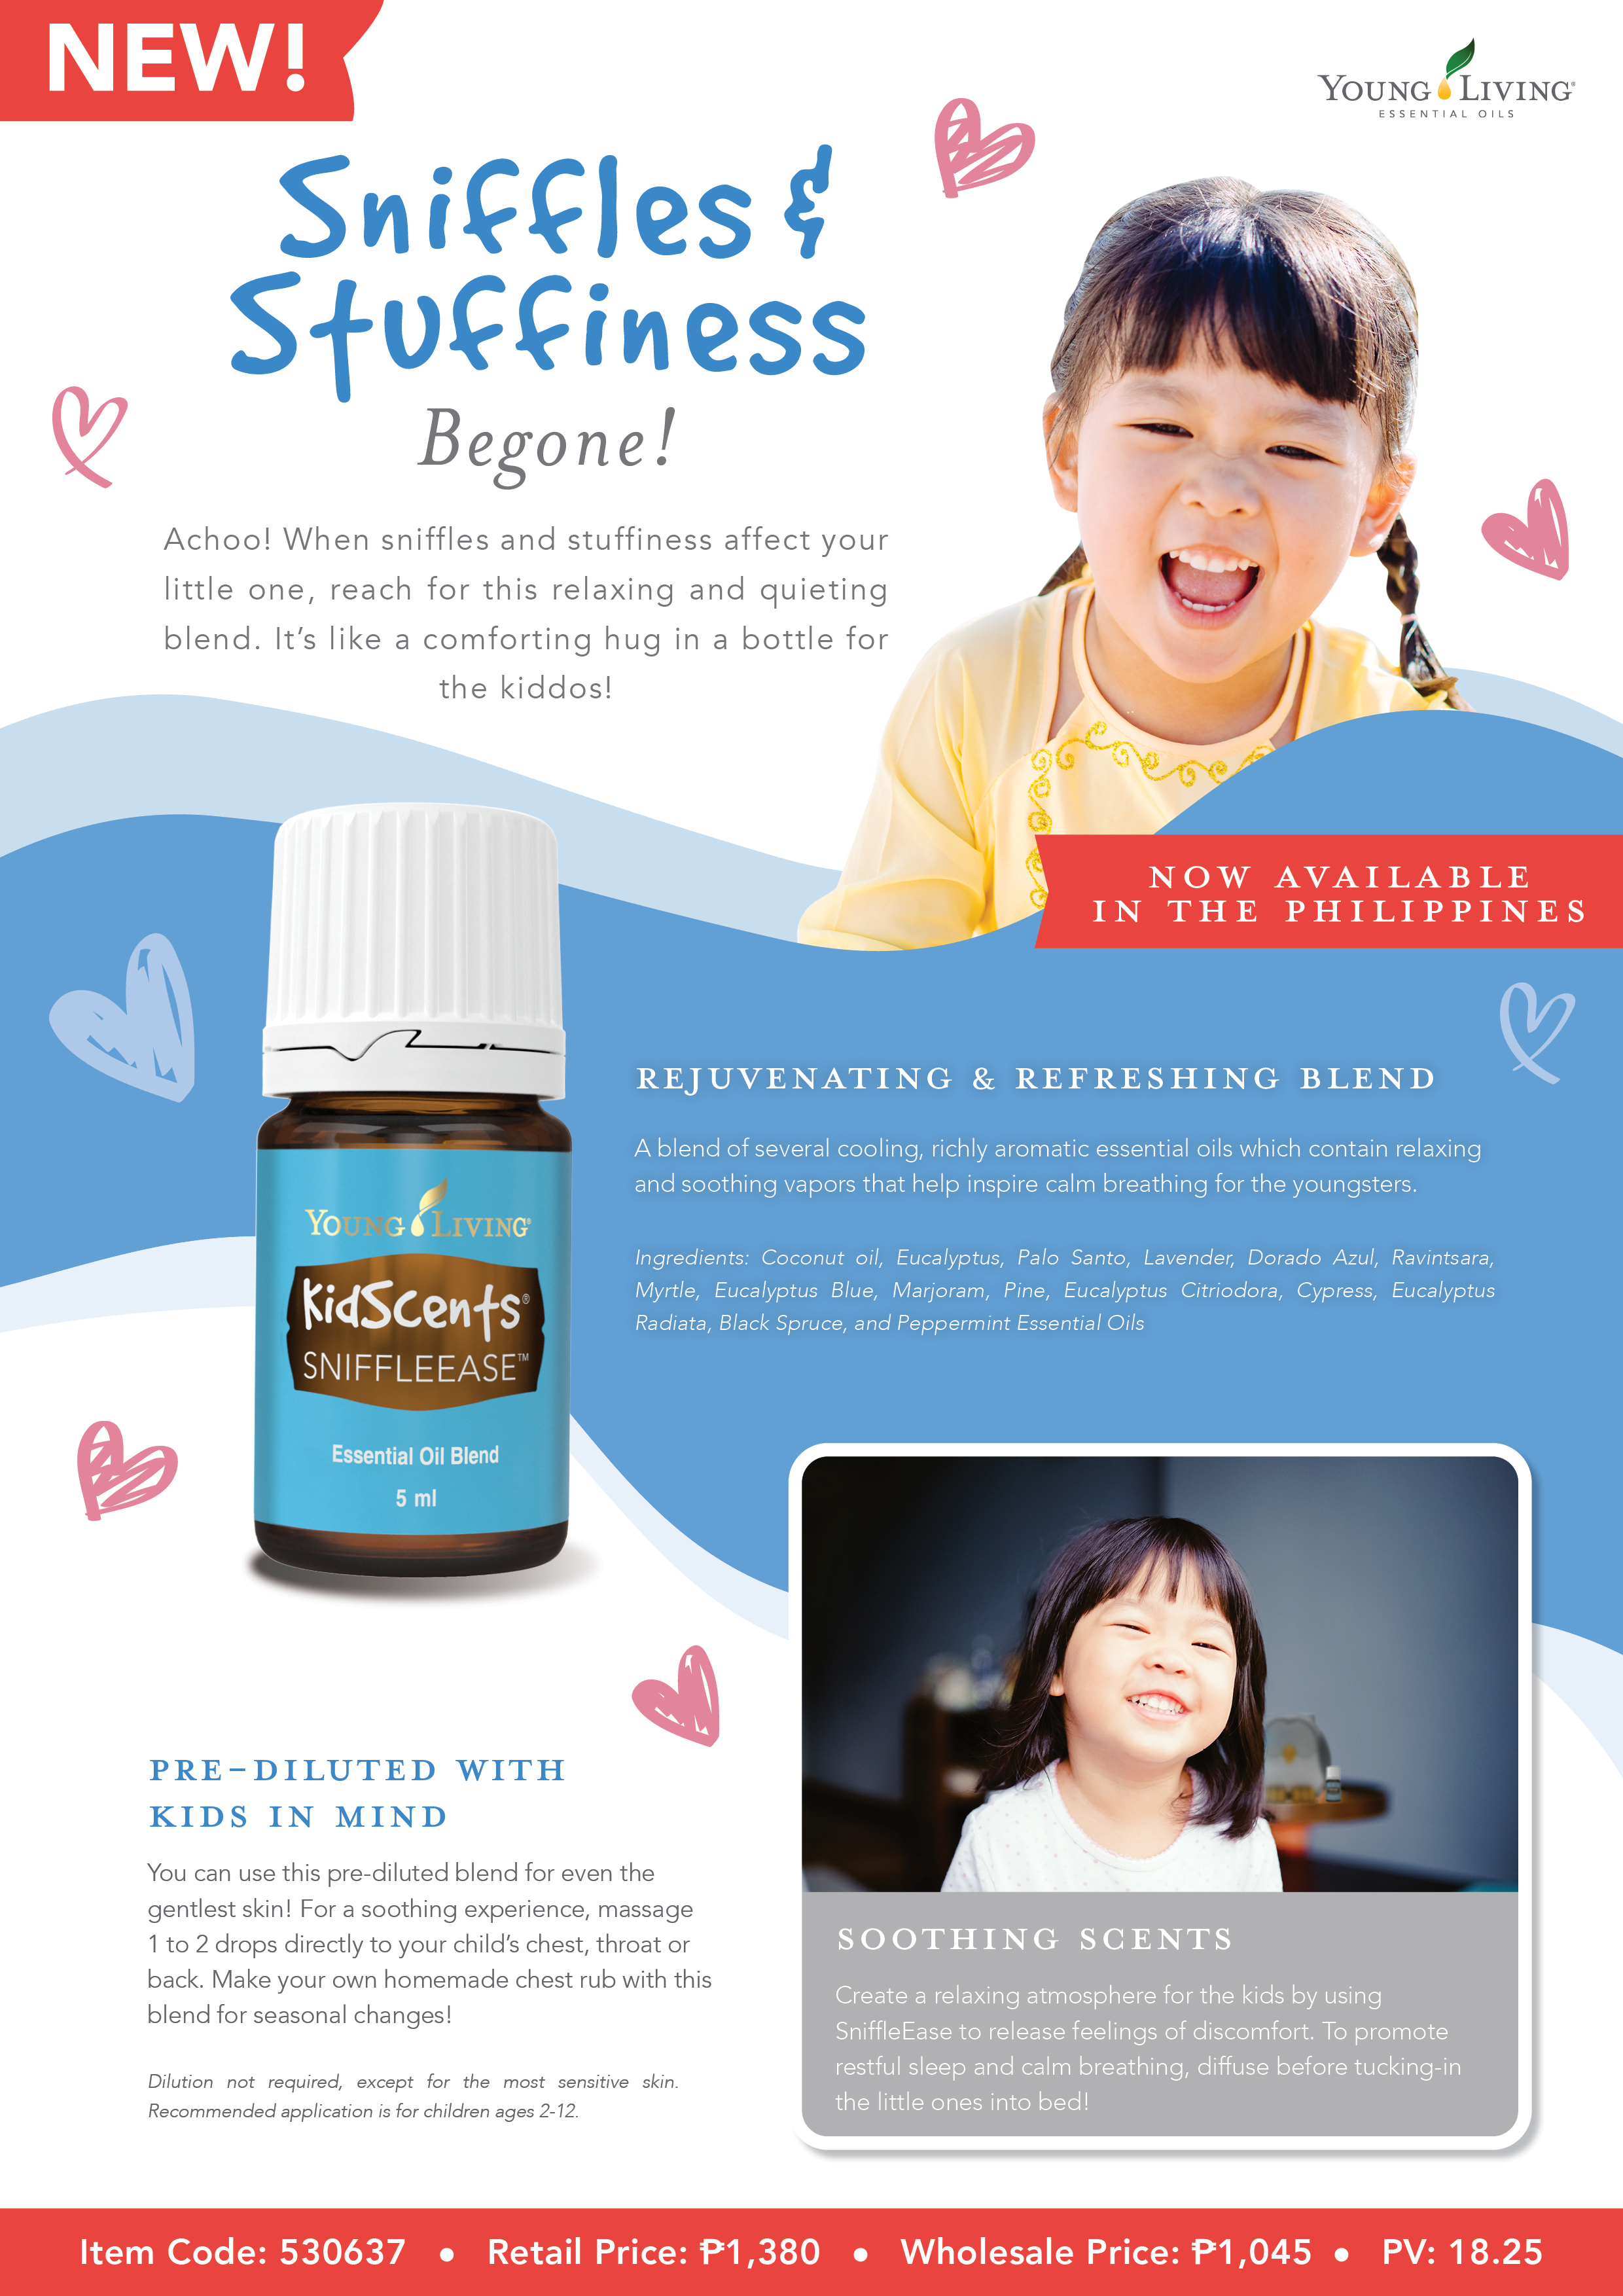 KidScents | Young Living Philippines | Young Living Essential Oils